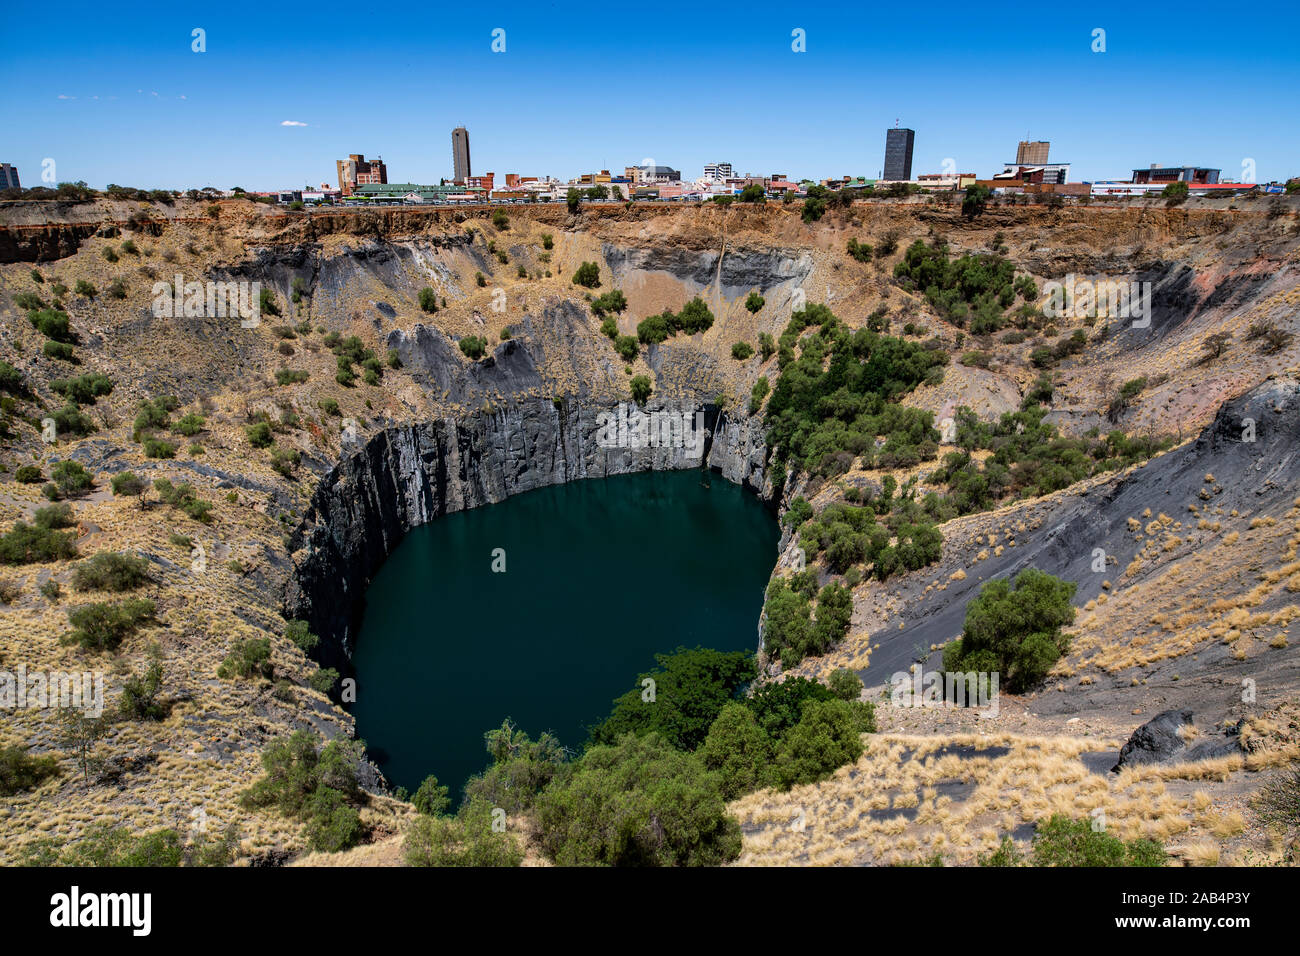 Former diamond mine the 'Big Hole', now museum in Kimberley South Africa Stock Photo